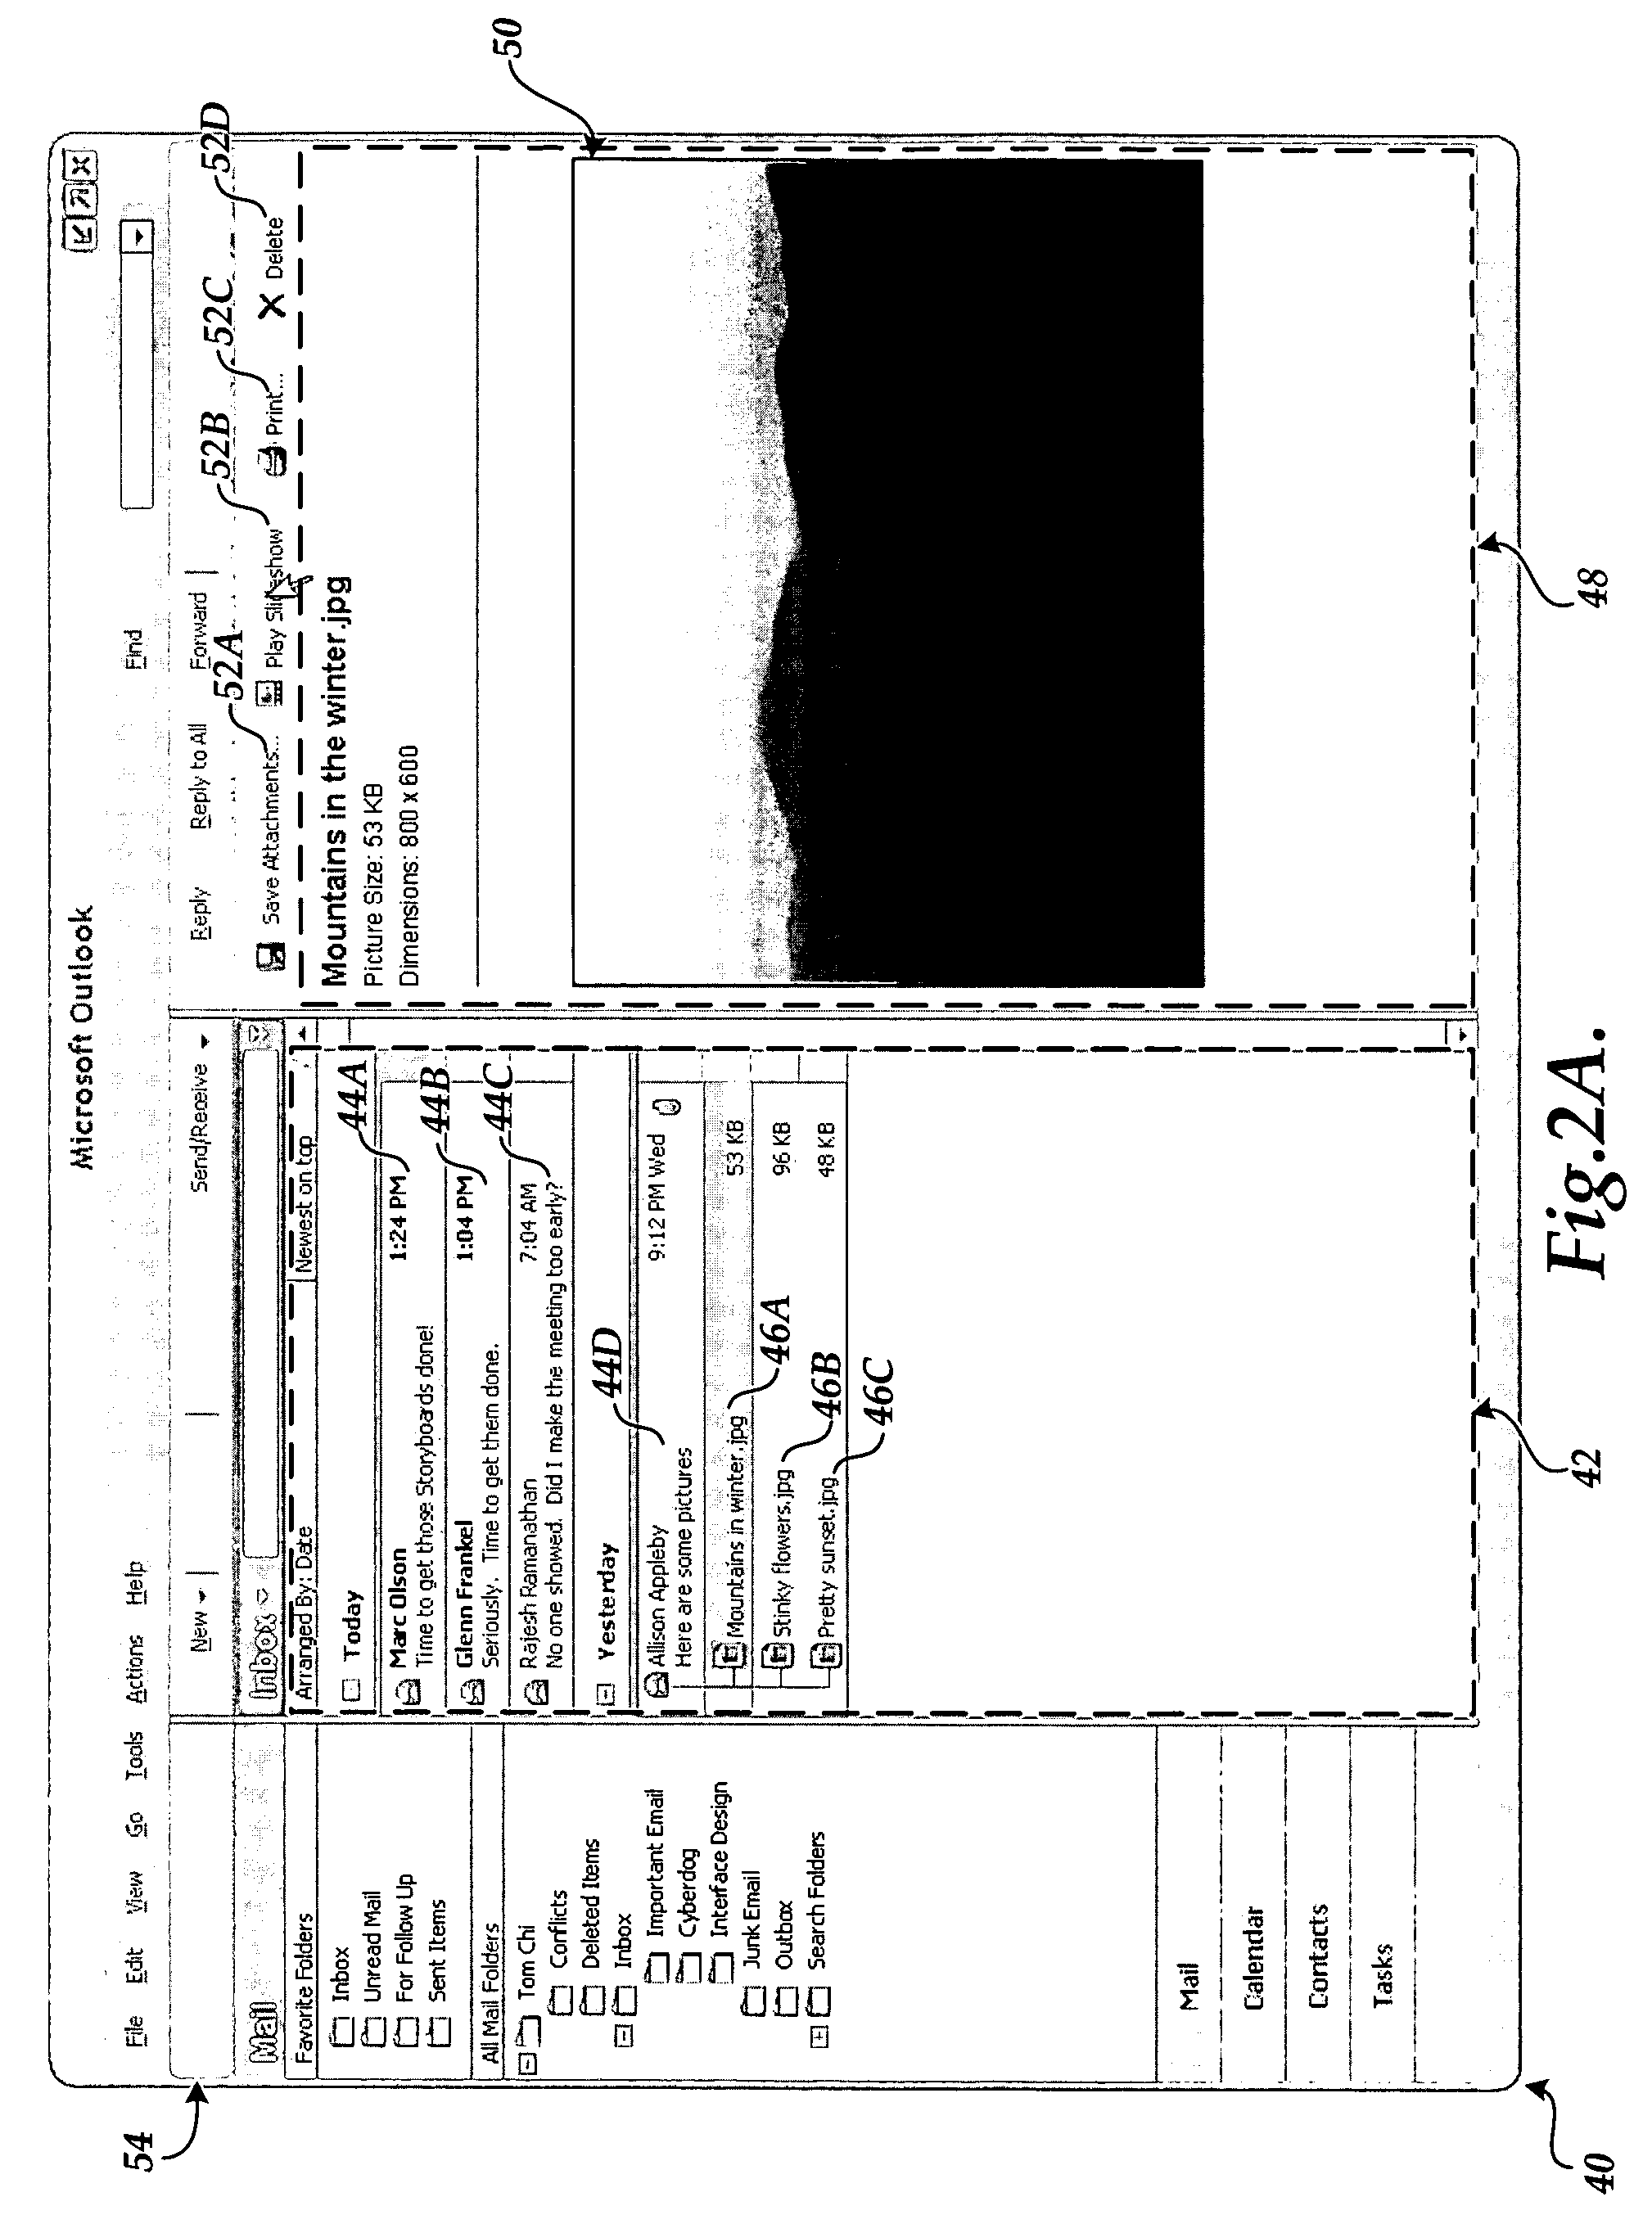 Method and computer-readable medium for navigating between attachments to electronic mail messages